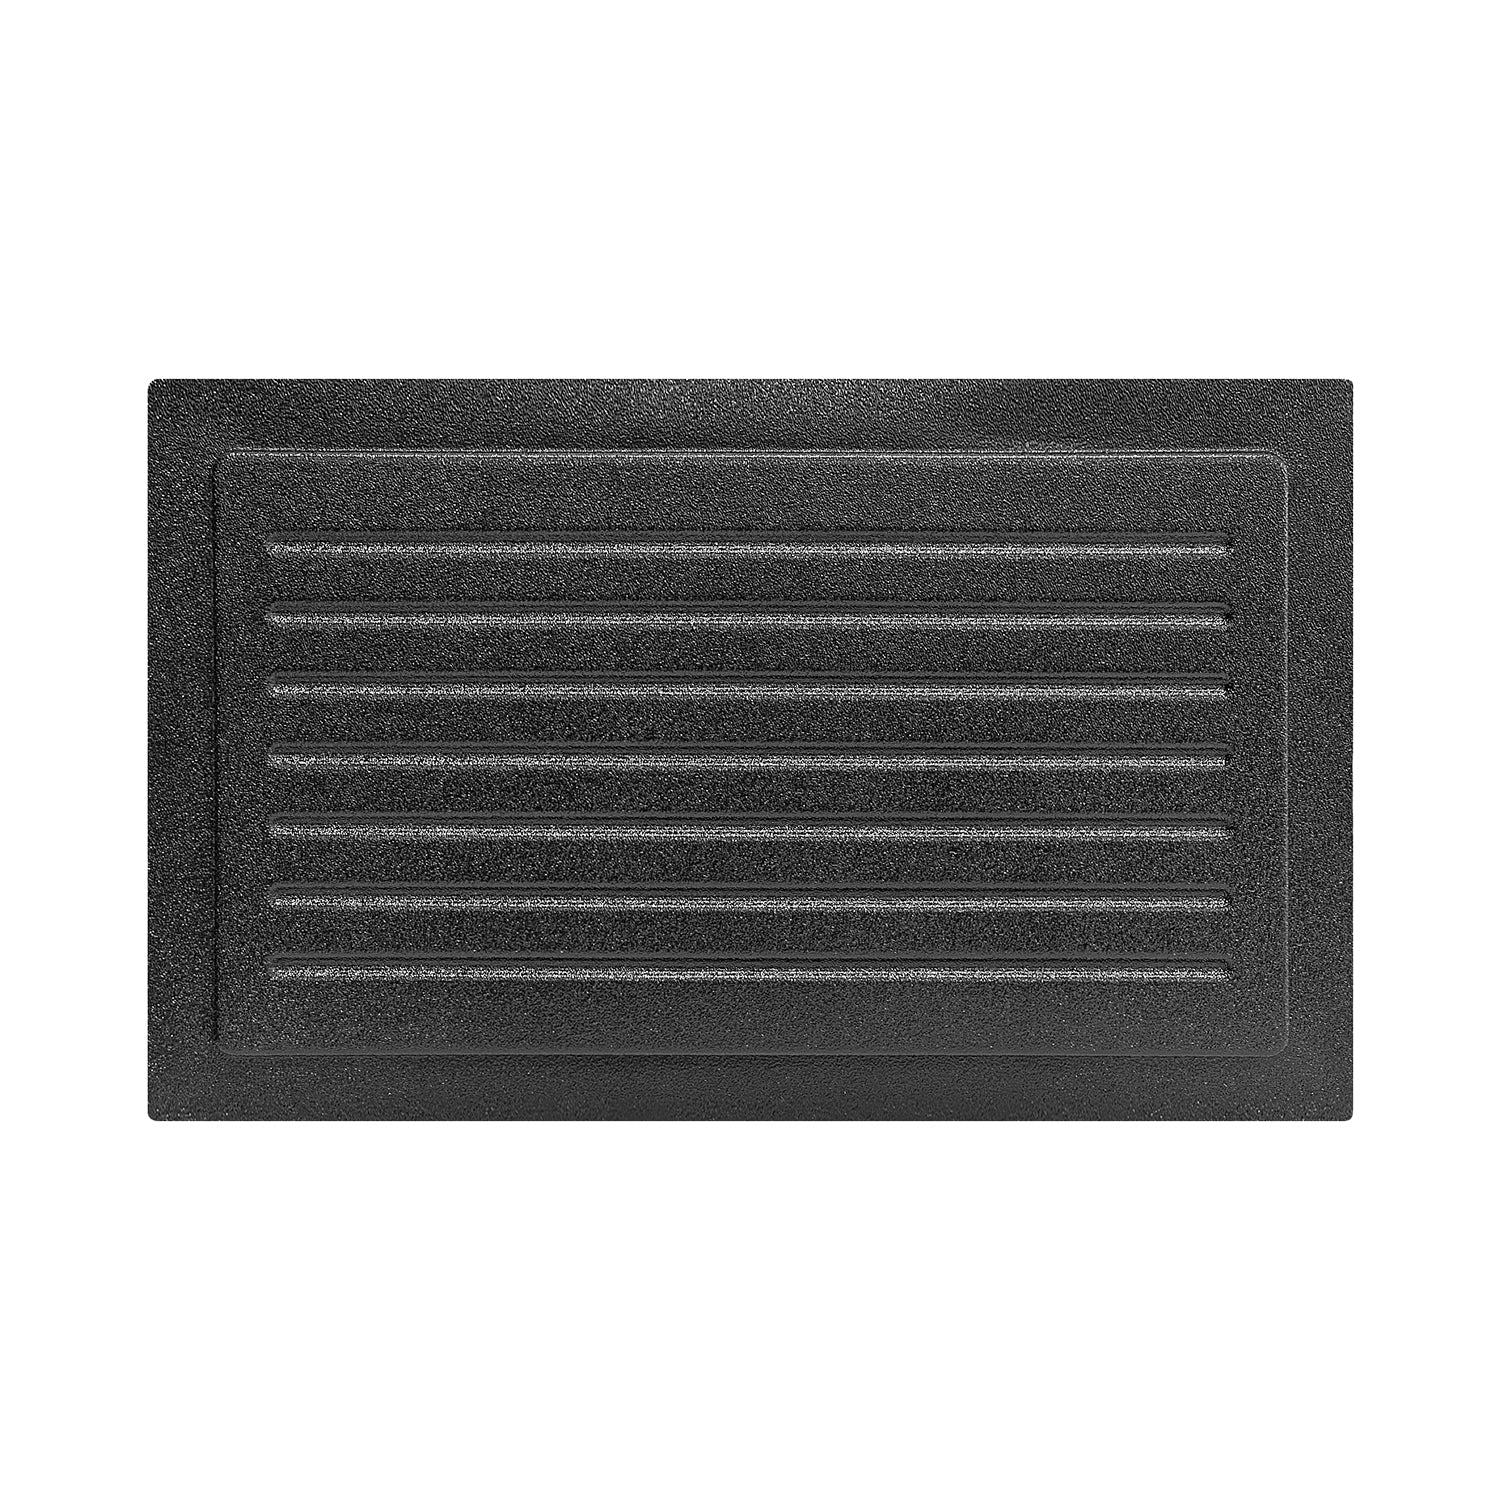 Large outward mounted vent cover (black)